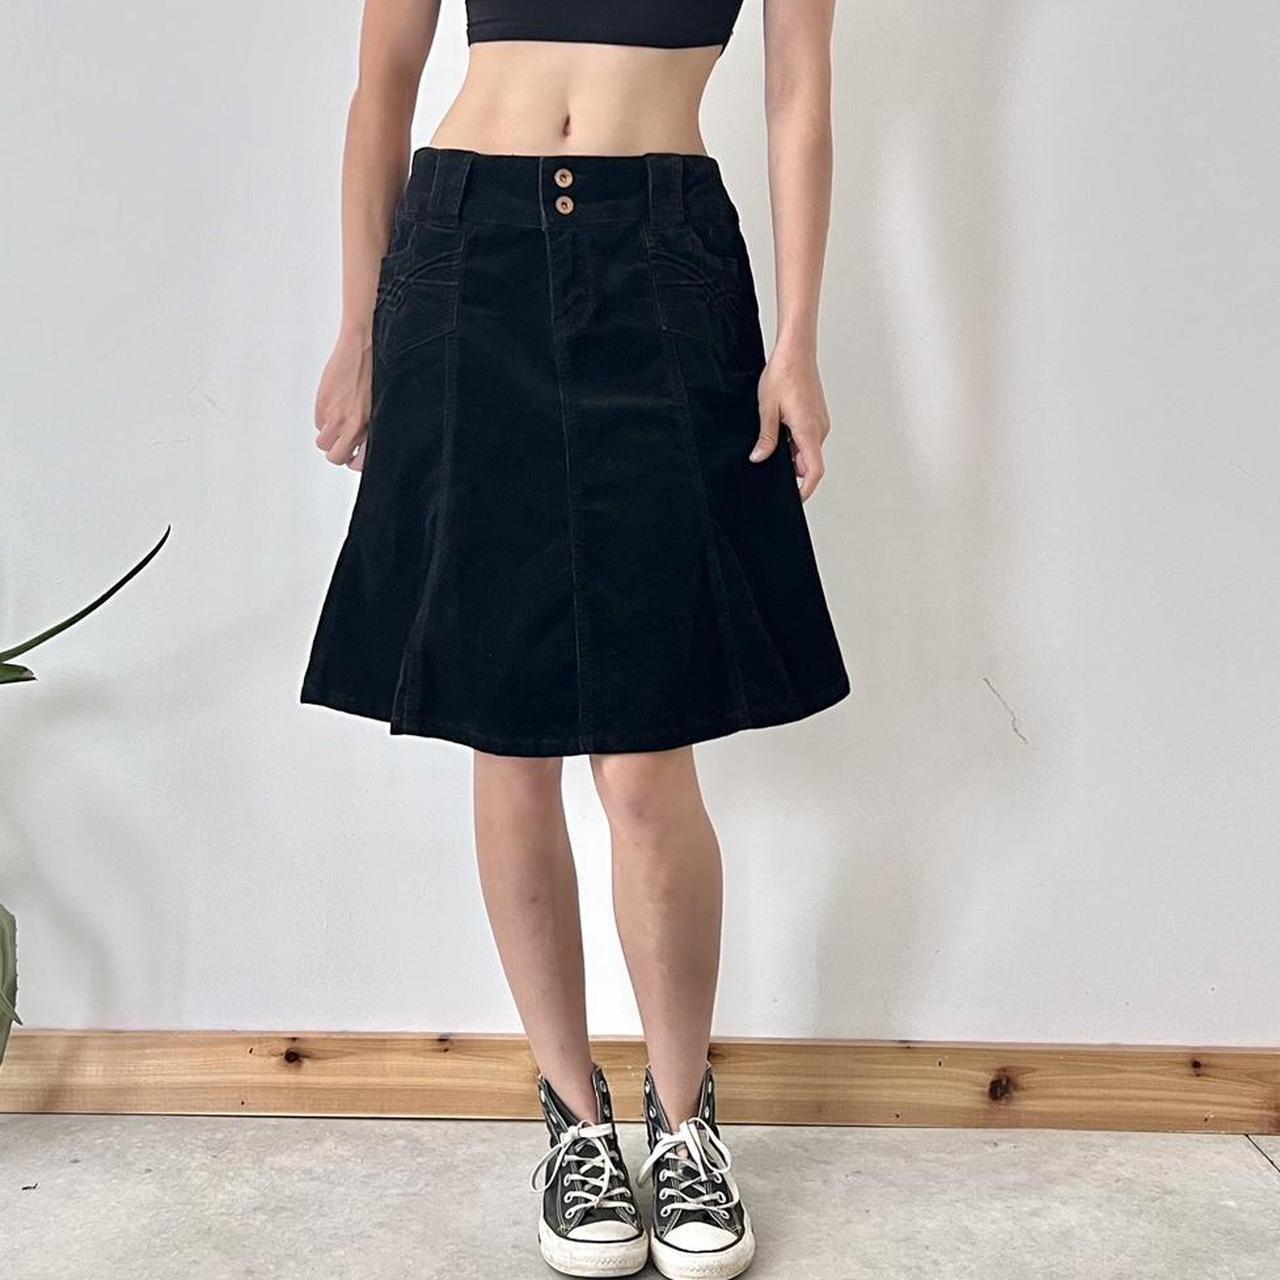 Black Corduroy Skirt Such a cute fit. Can be worn... - Depop